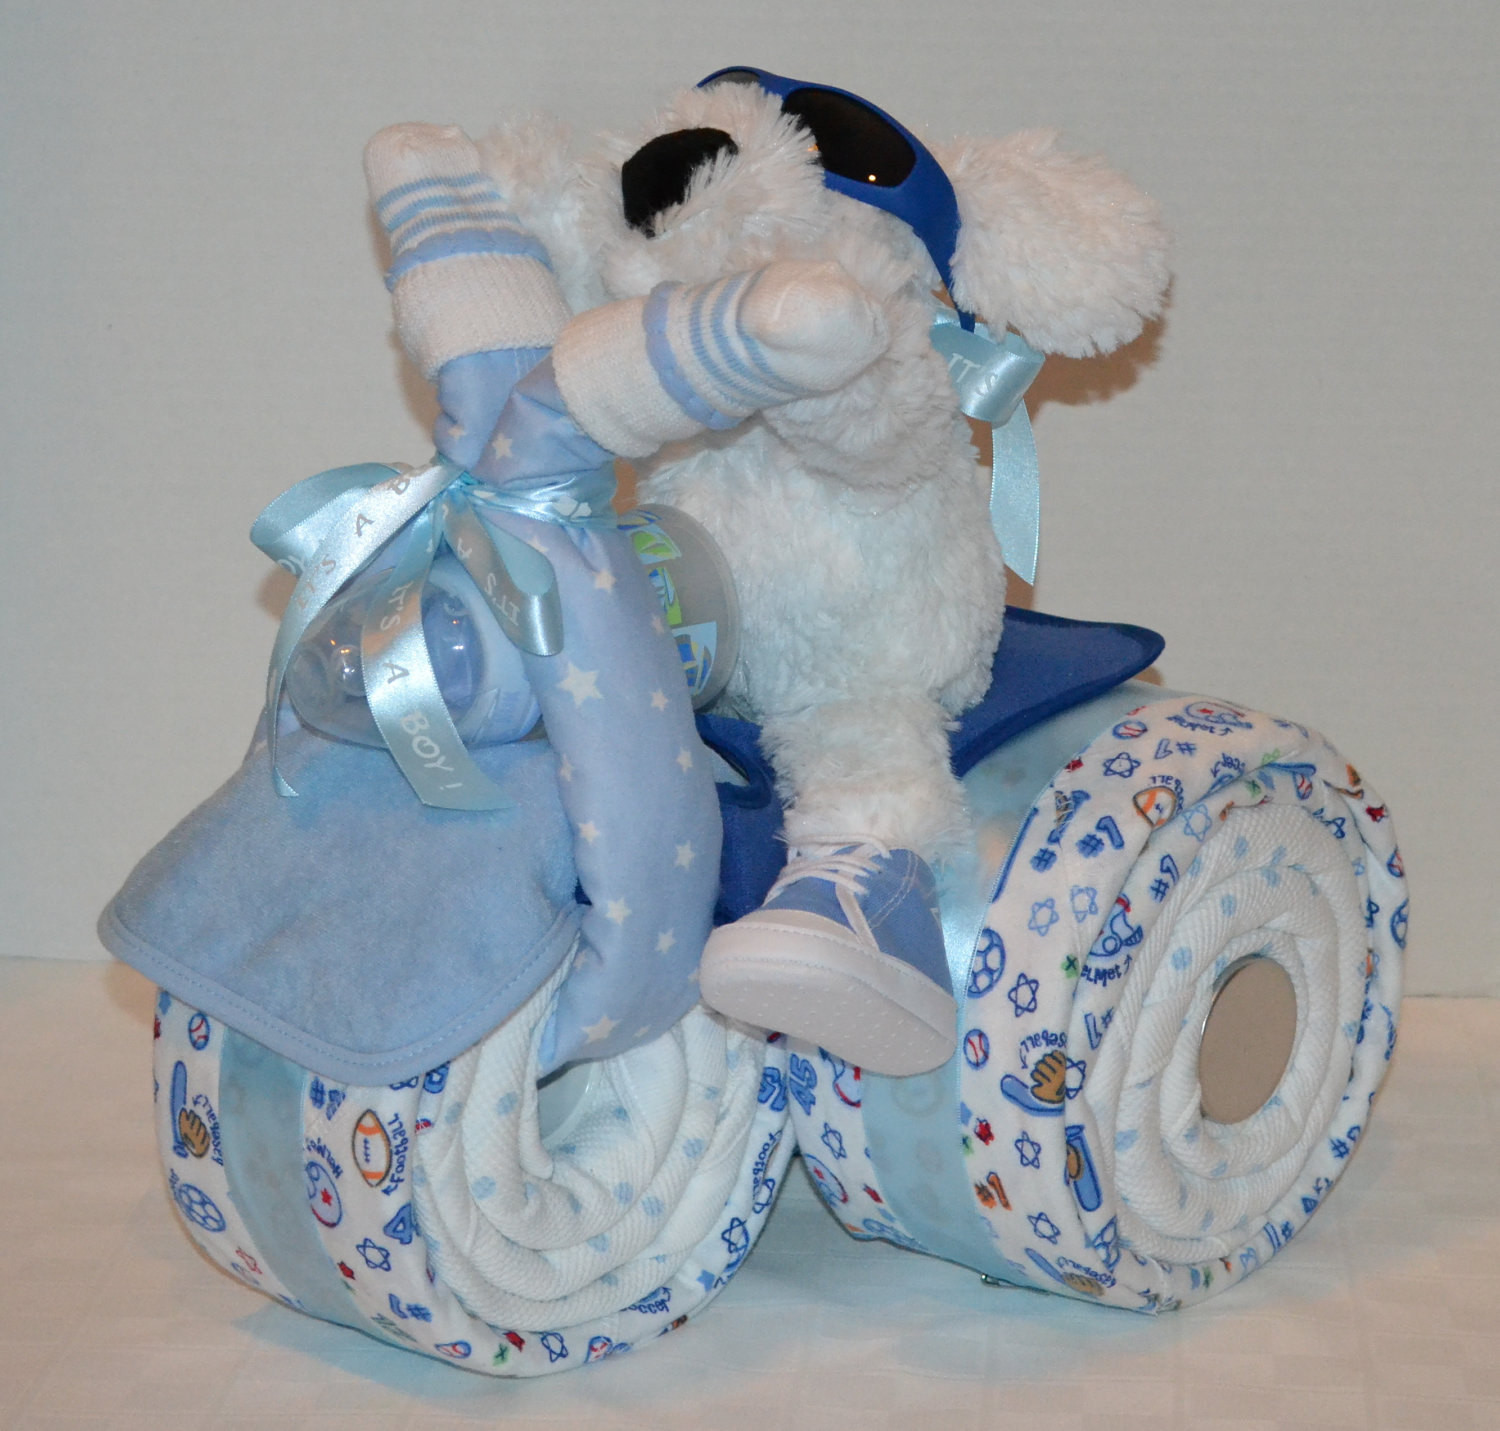 Unique Baby Shower Gift Ideas For Boy
 Tricycle Trike Diaper Cake Baby Shower Gift Sports theme